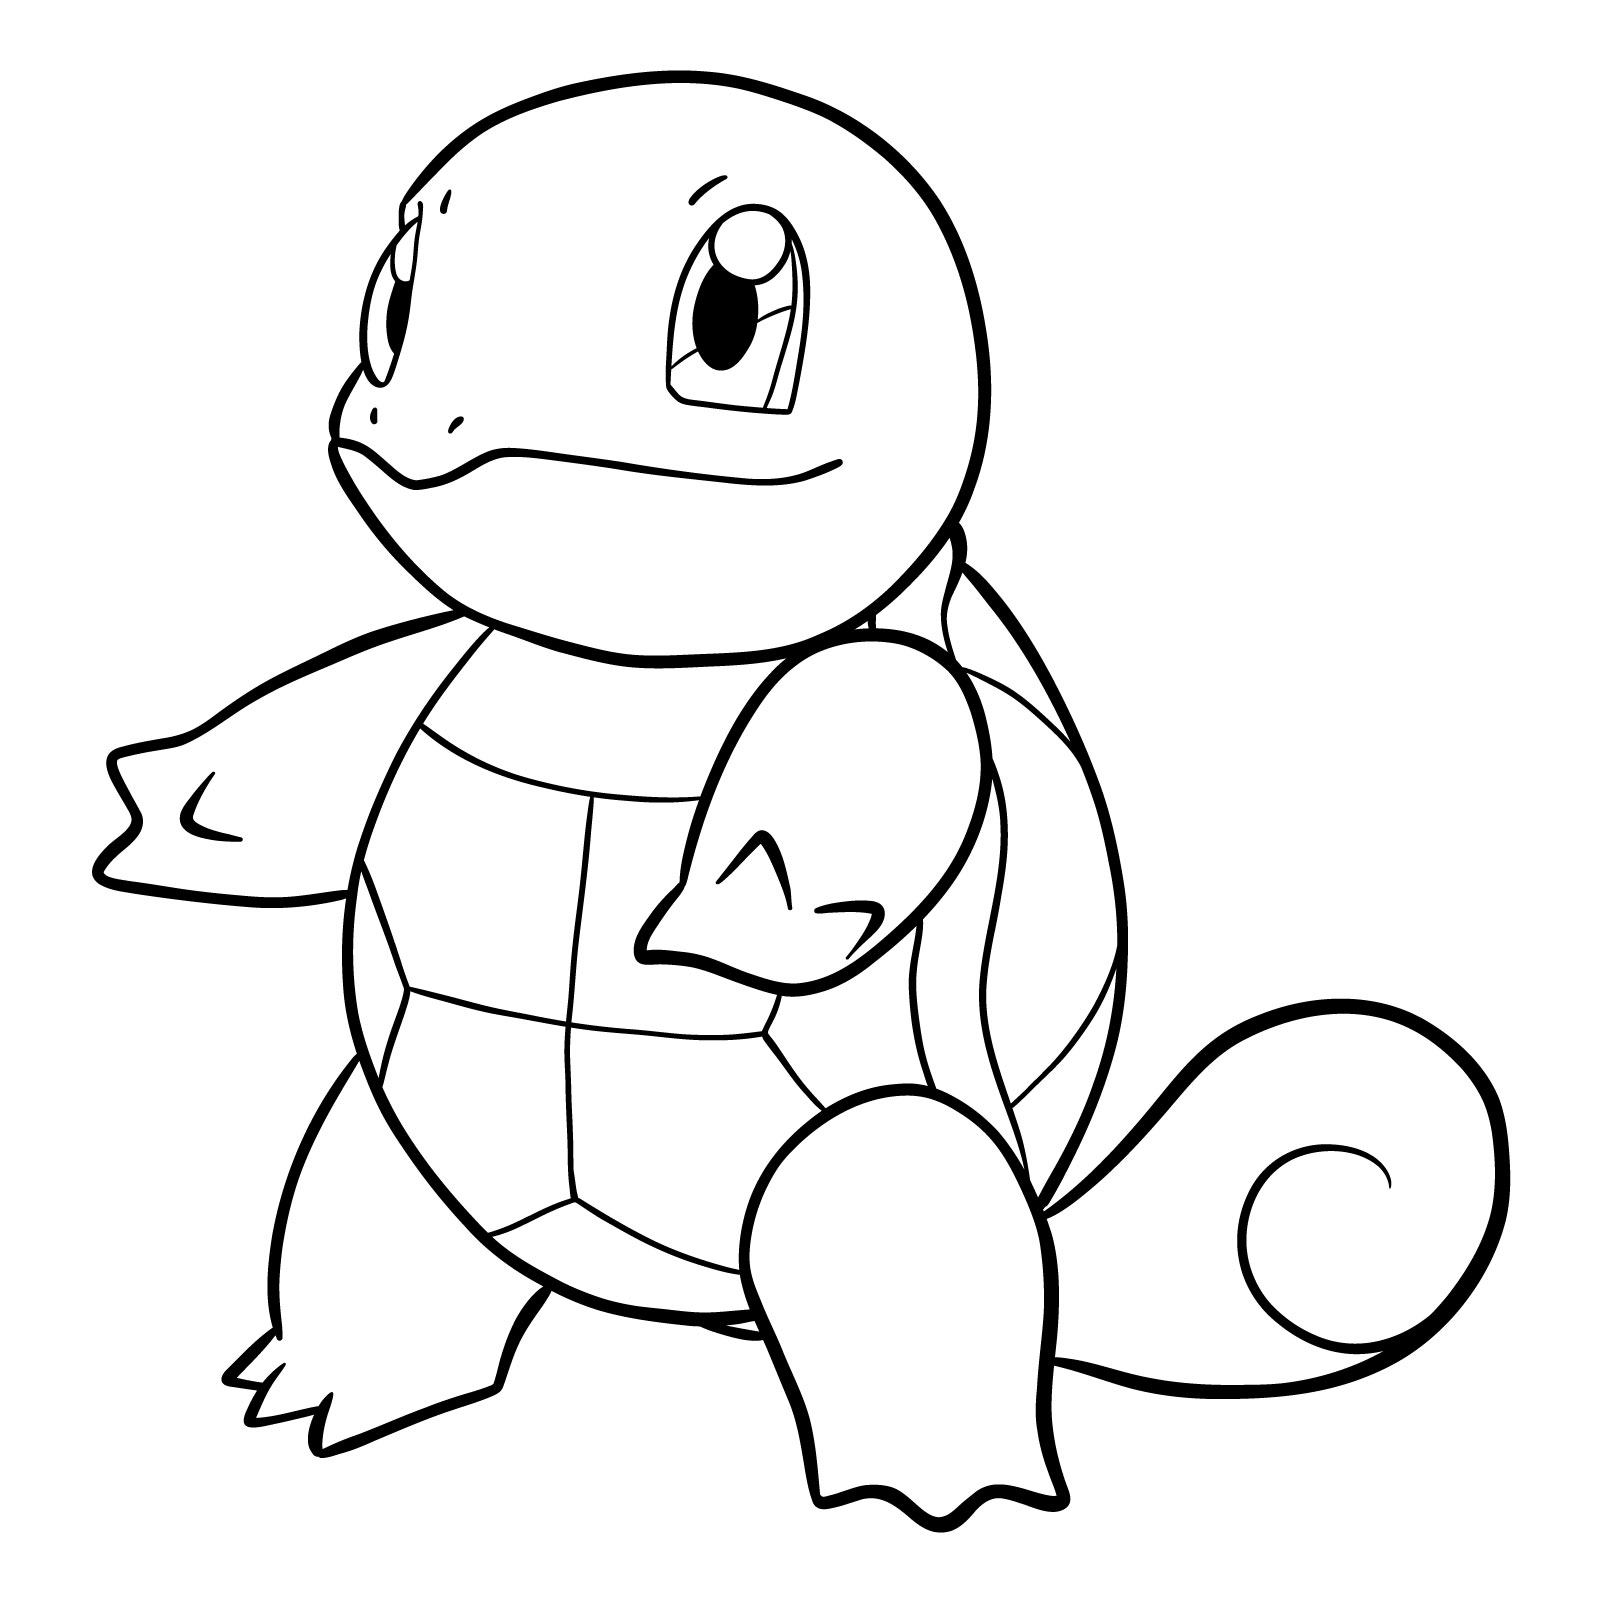 How to draw Squirtle - final step